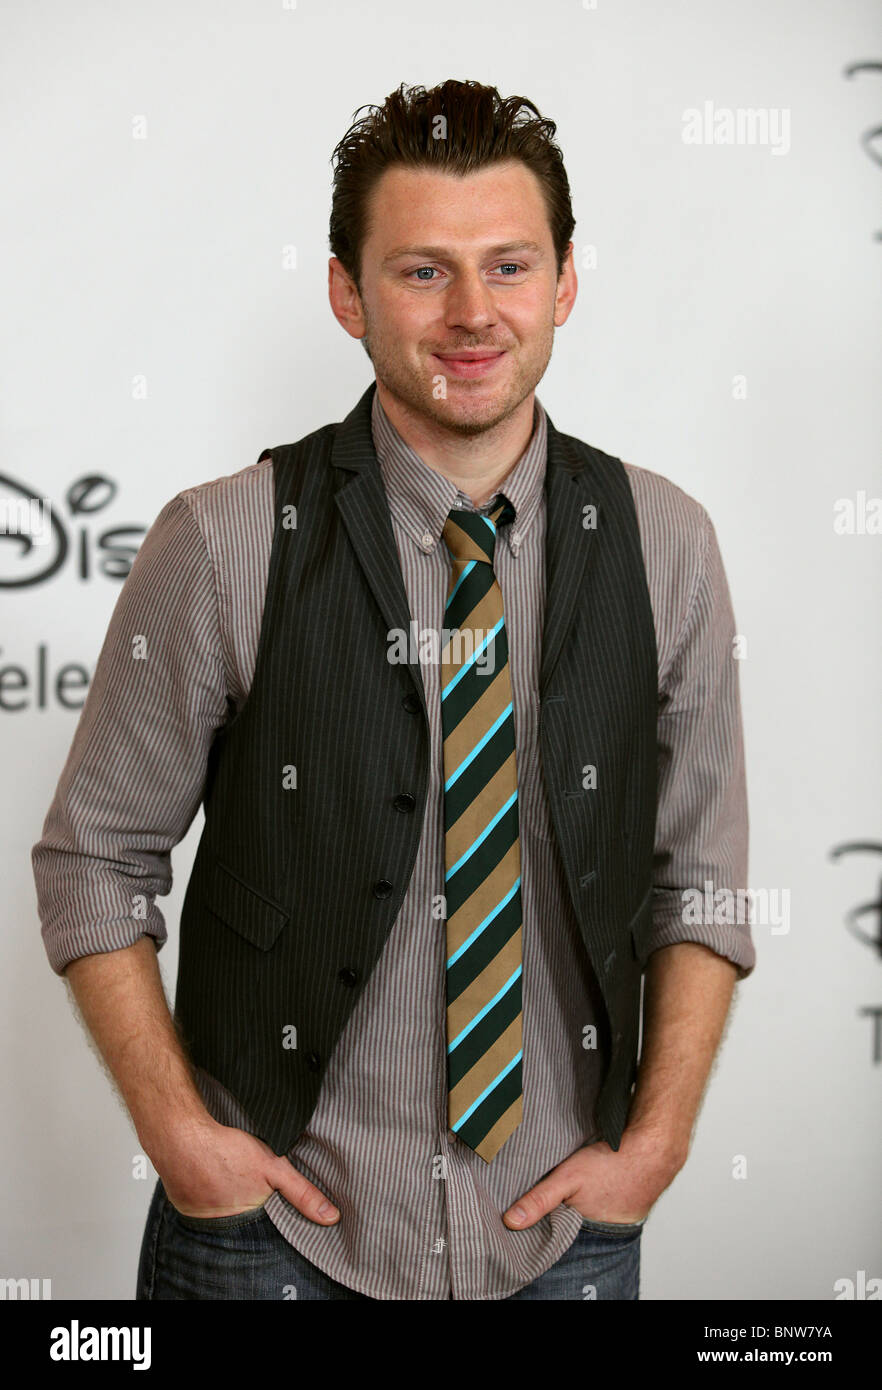 KEIR O'DONNELL DISNEY ABC TELEVISION SUMMER PRESS TOUR BEVERLY HILLS CALIFORNIA USA 01 August 2010 Stock Photo